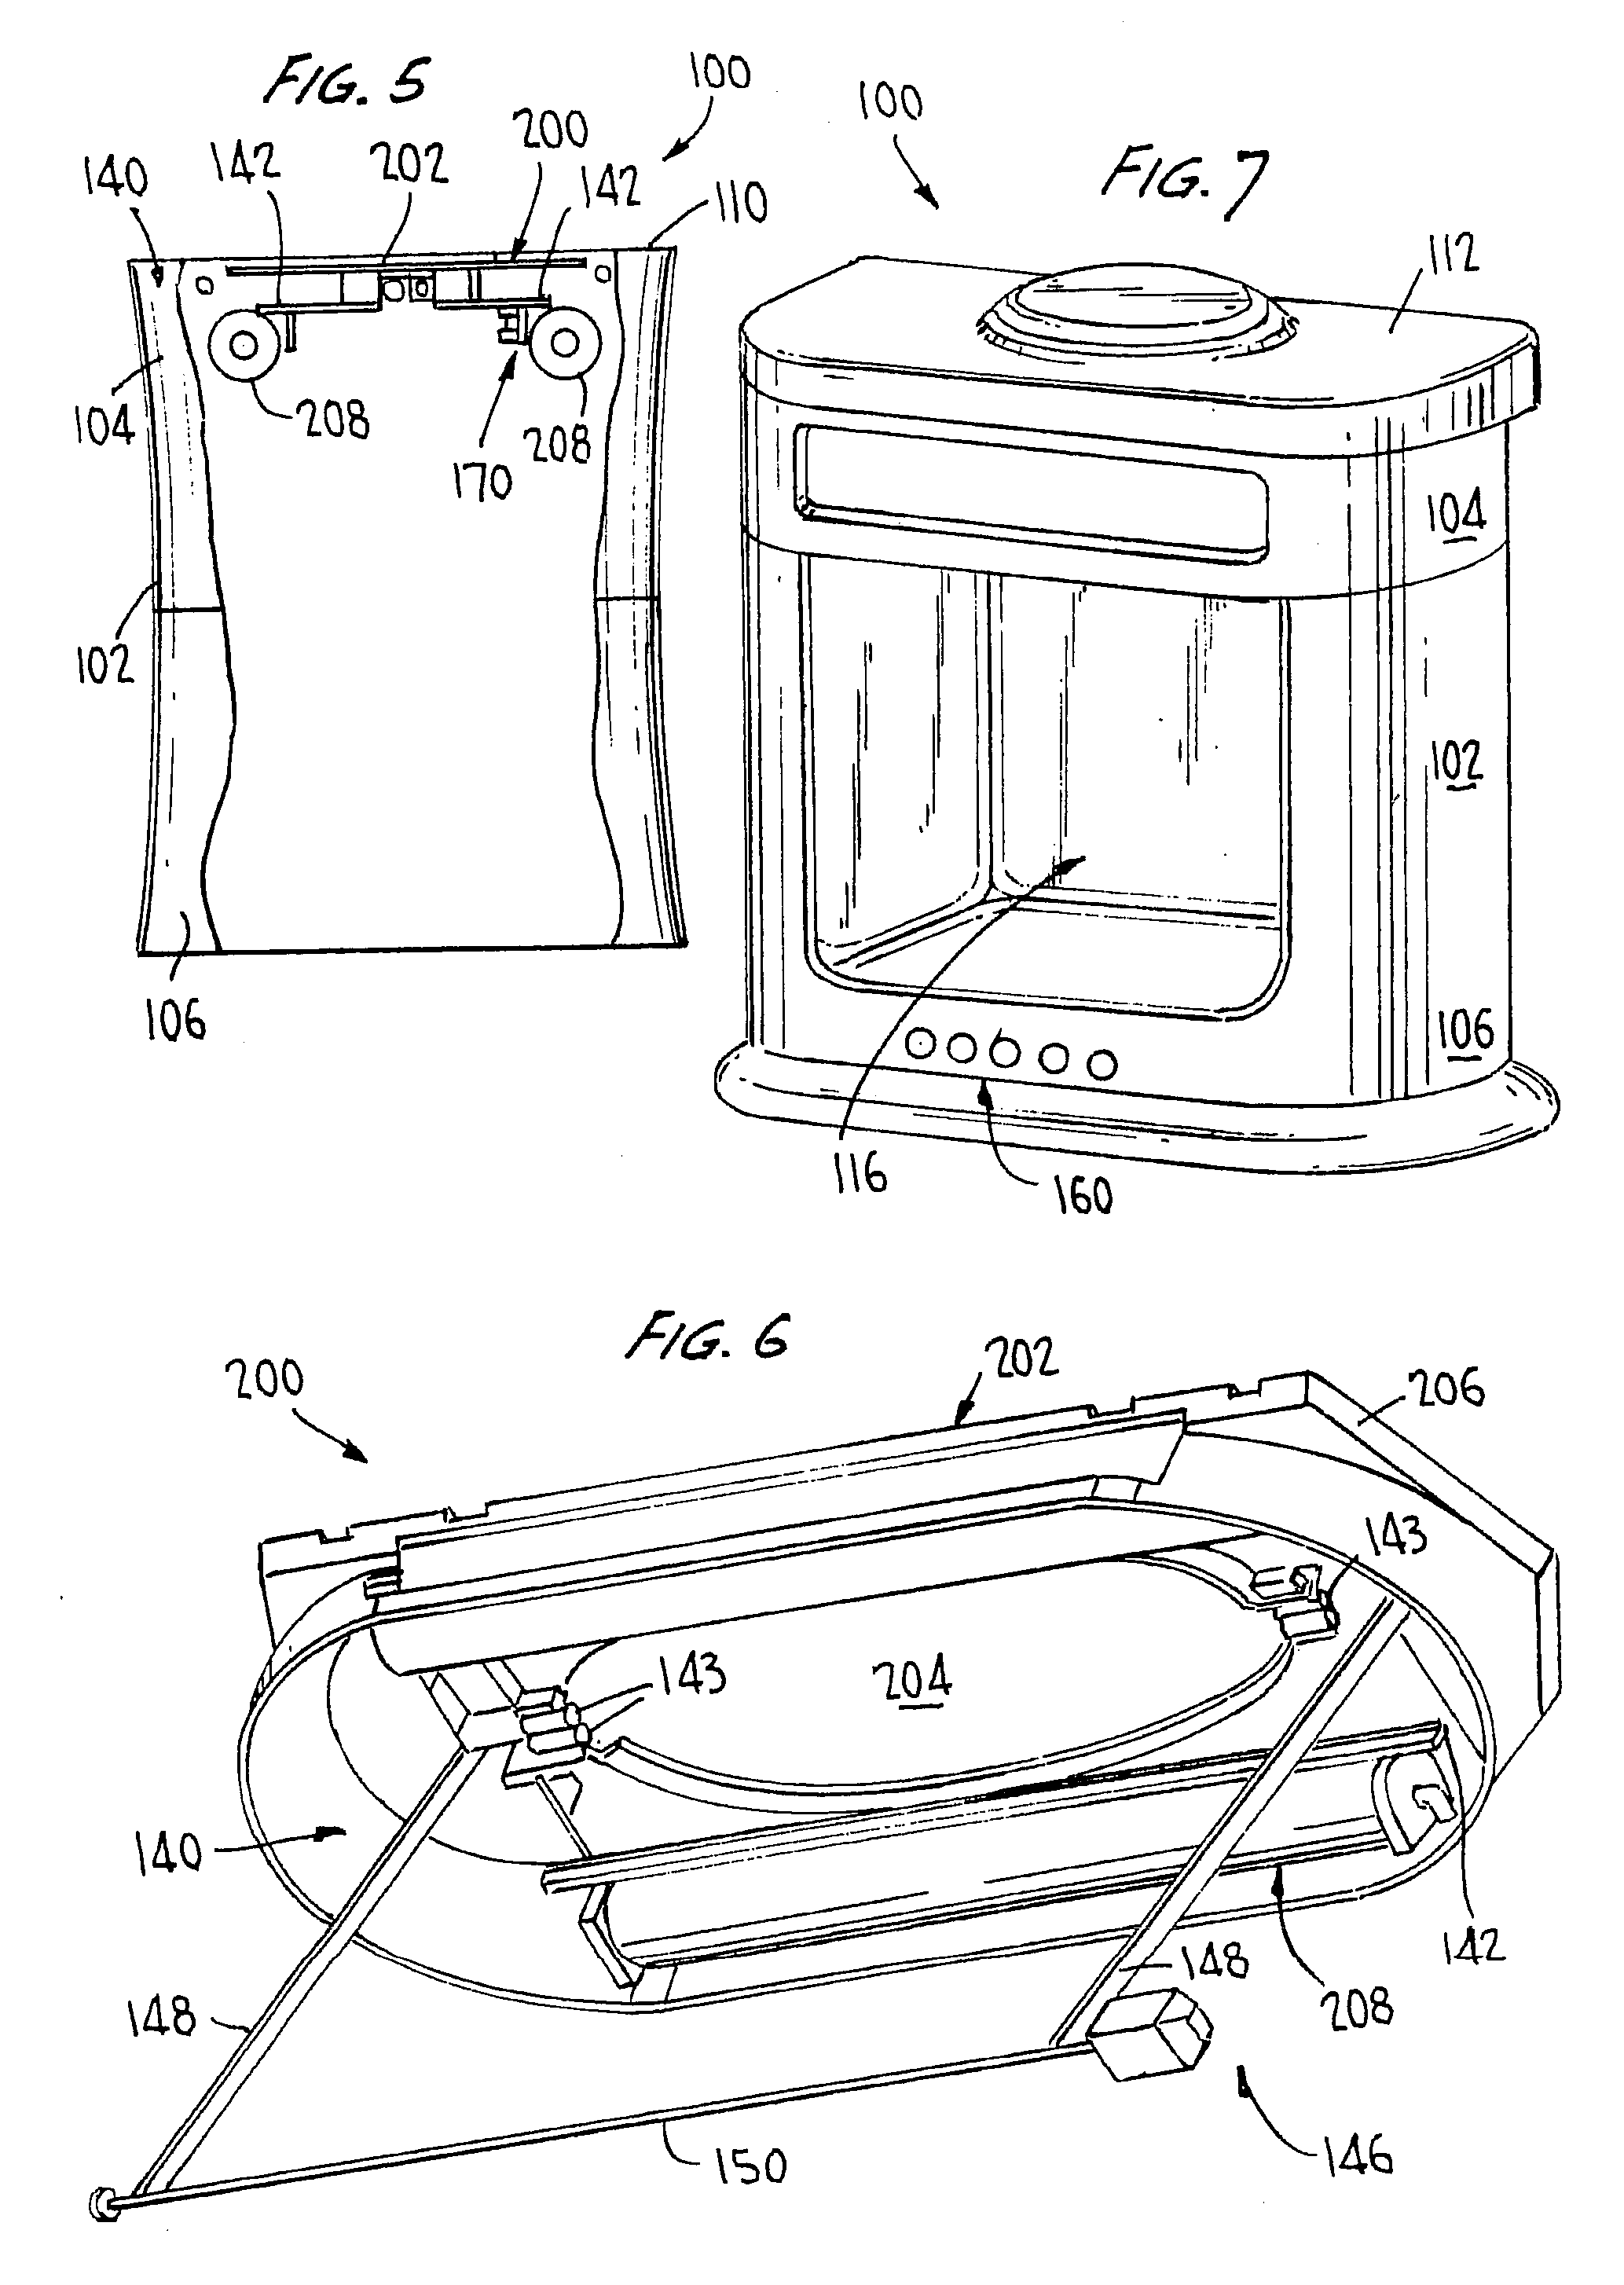 Vacuum sealer apparatus and a film cartridge for a vacuum sealer and a means of operating the vacuum sealer and the film cartridge